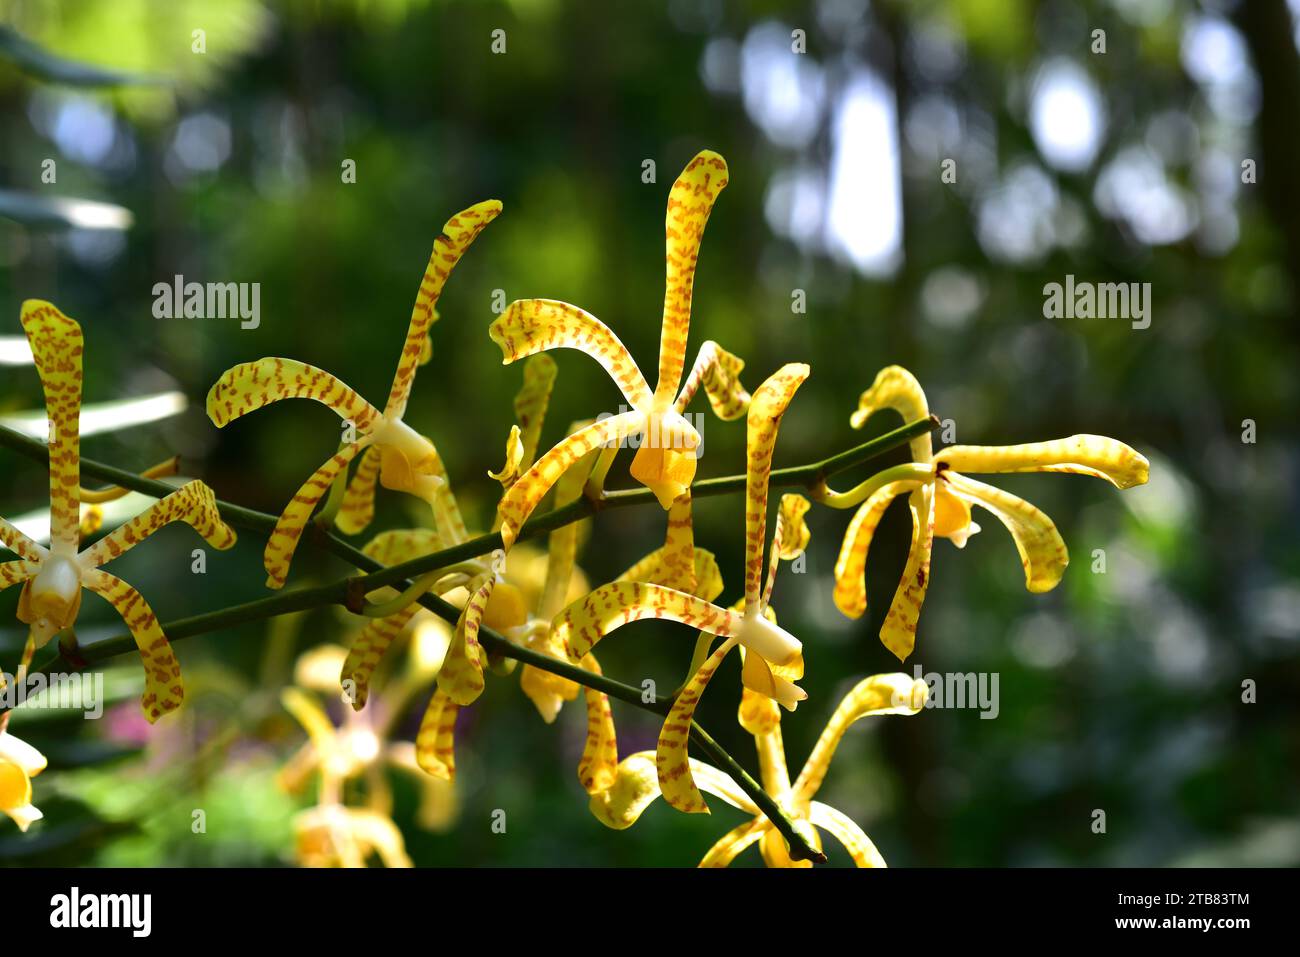 Spider orchid (Arachnis flos-aeris) is an epiphytic orchid native of the mangroves of Indonesia, Malaysia and Philippines. Stock Photo